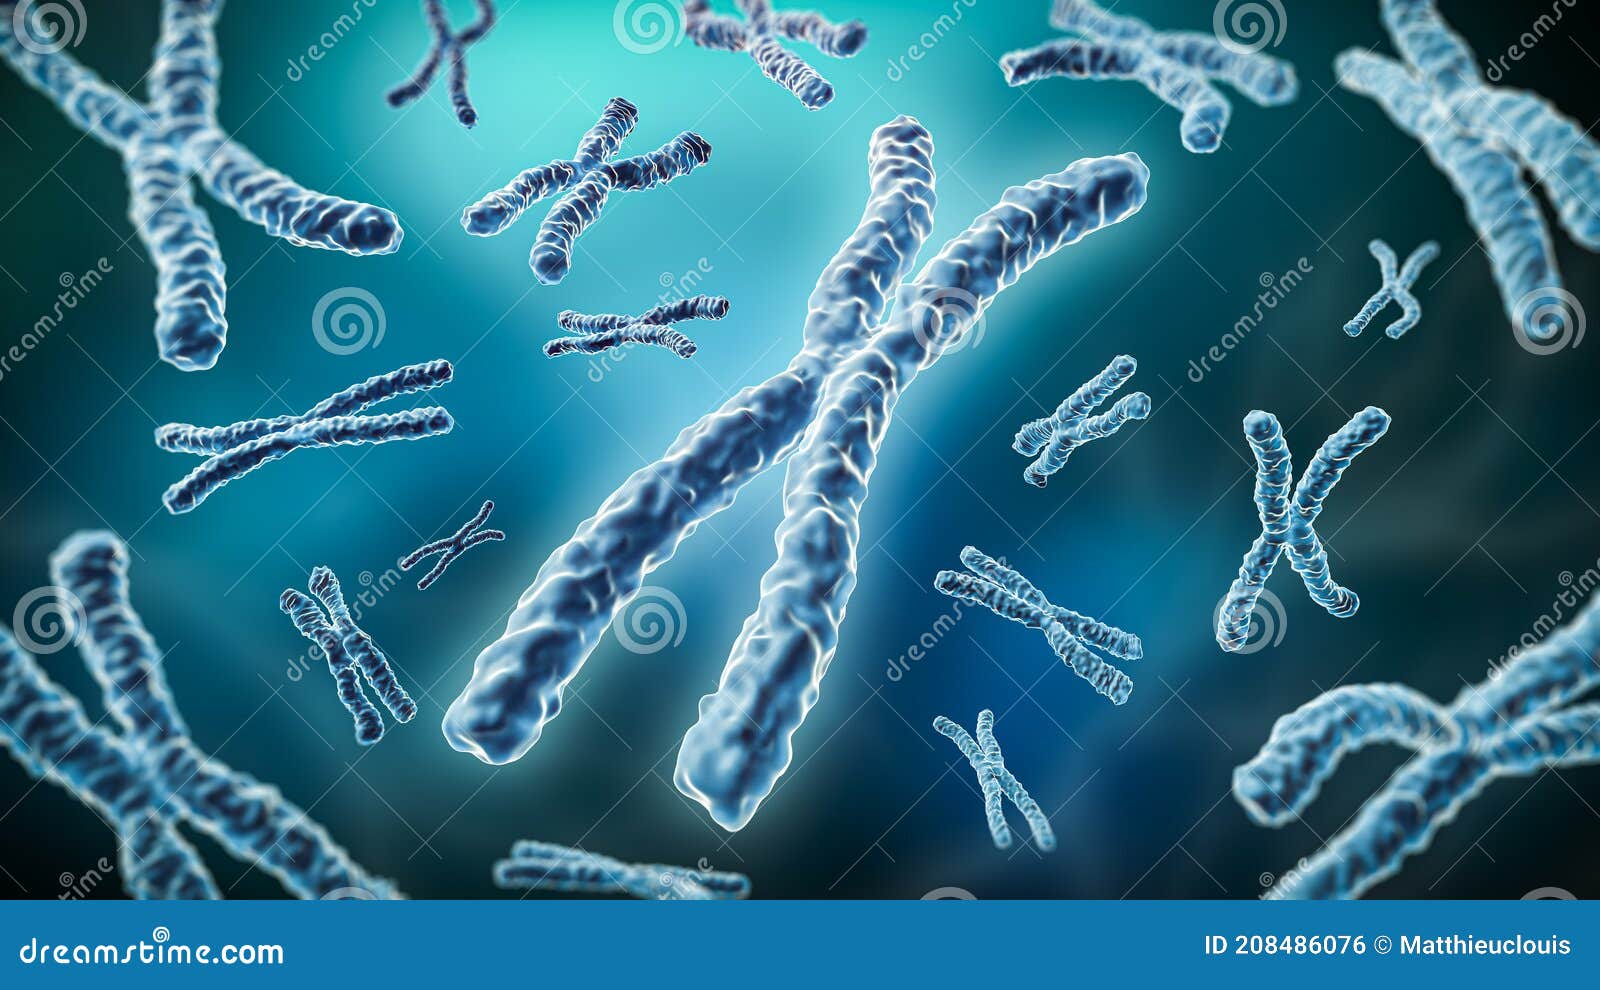 Duplicated Homologous Chromosomes Pair And Crossing Over Cartoon Vector 